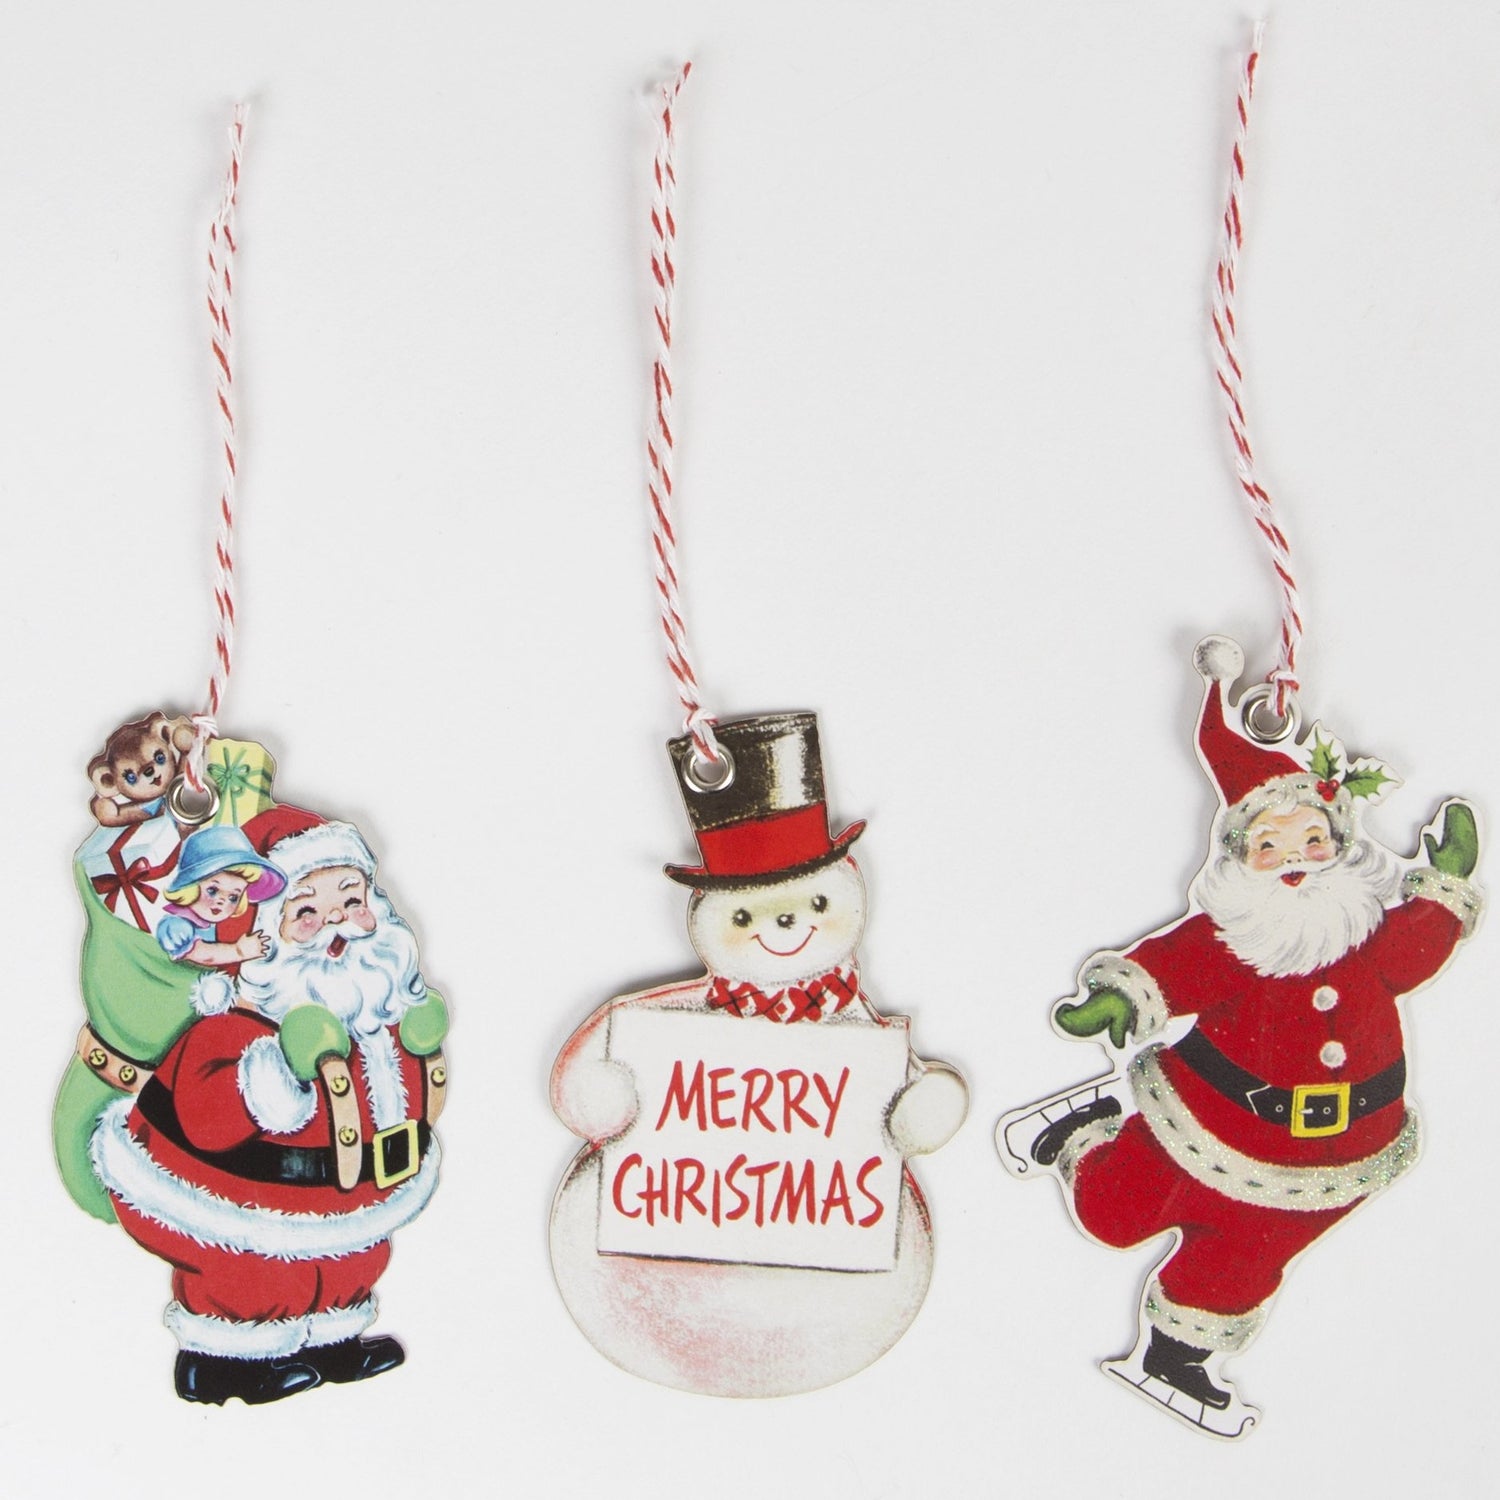 Father Christmas, Santa and Snowman Vintage-style gift tags available in Cirencester, Gloucestershire or for postal delivery